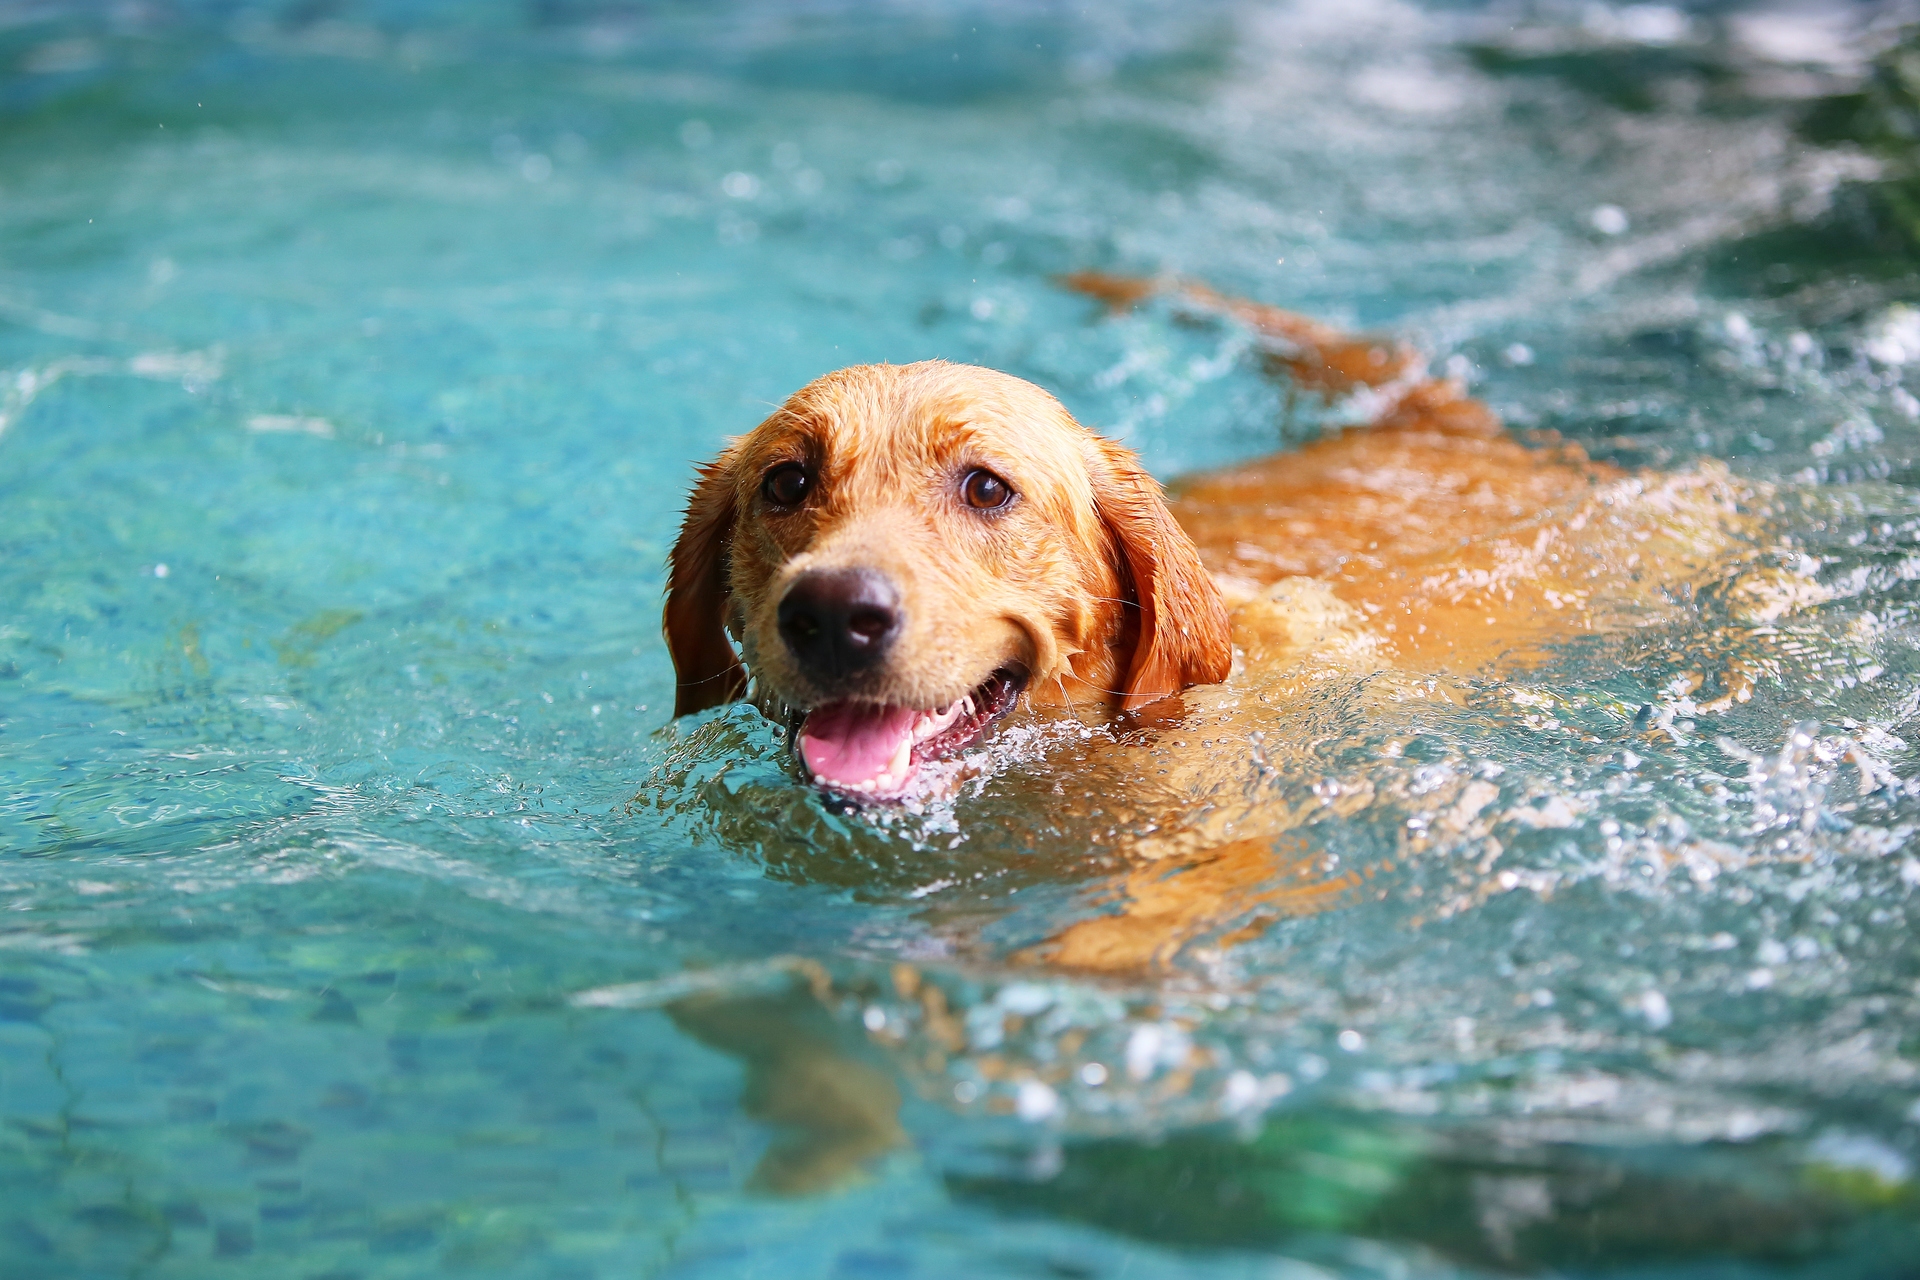 Do not leave your pets in water unsupervised. 